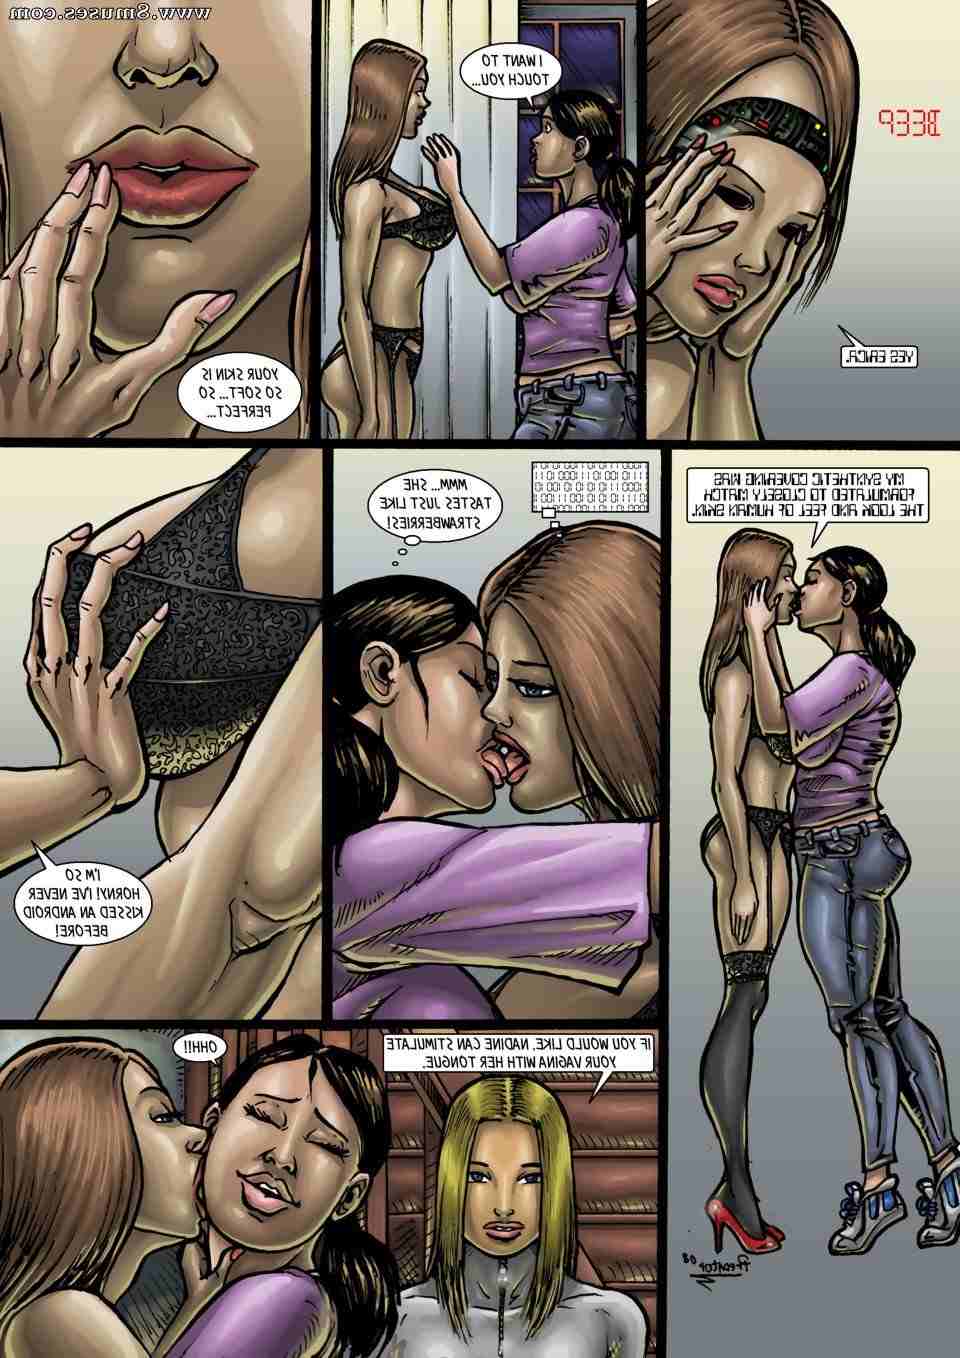 Various-Authors/Predator/The-Robots-of-Love The_Robots_of_Love__8muses_-_Sex_and_Porn_Comics_7.jpg